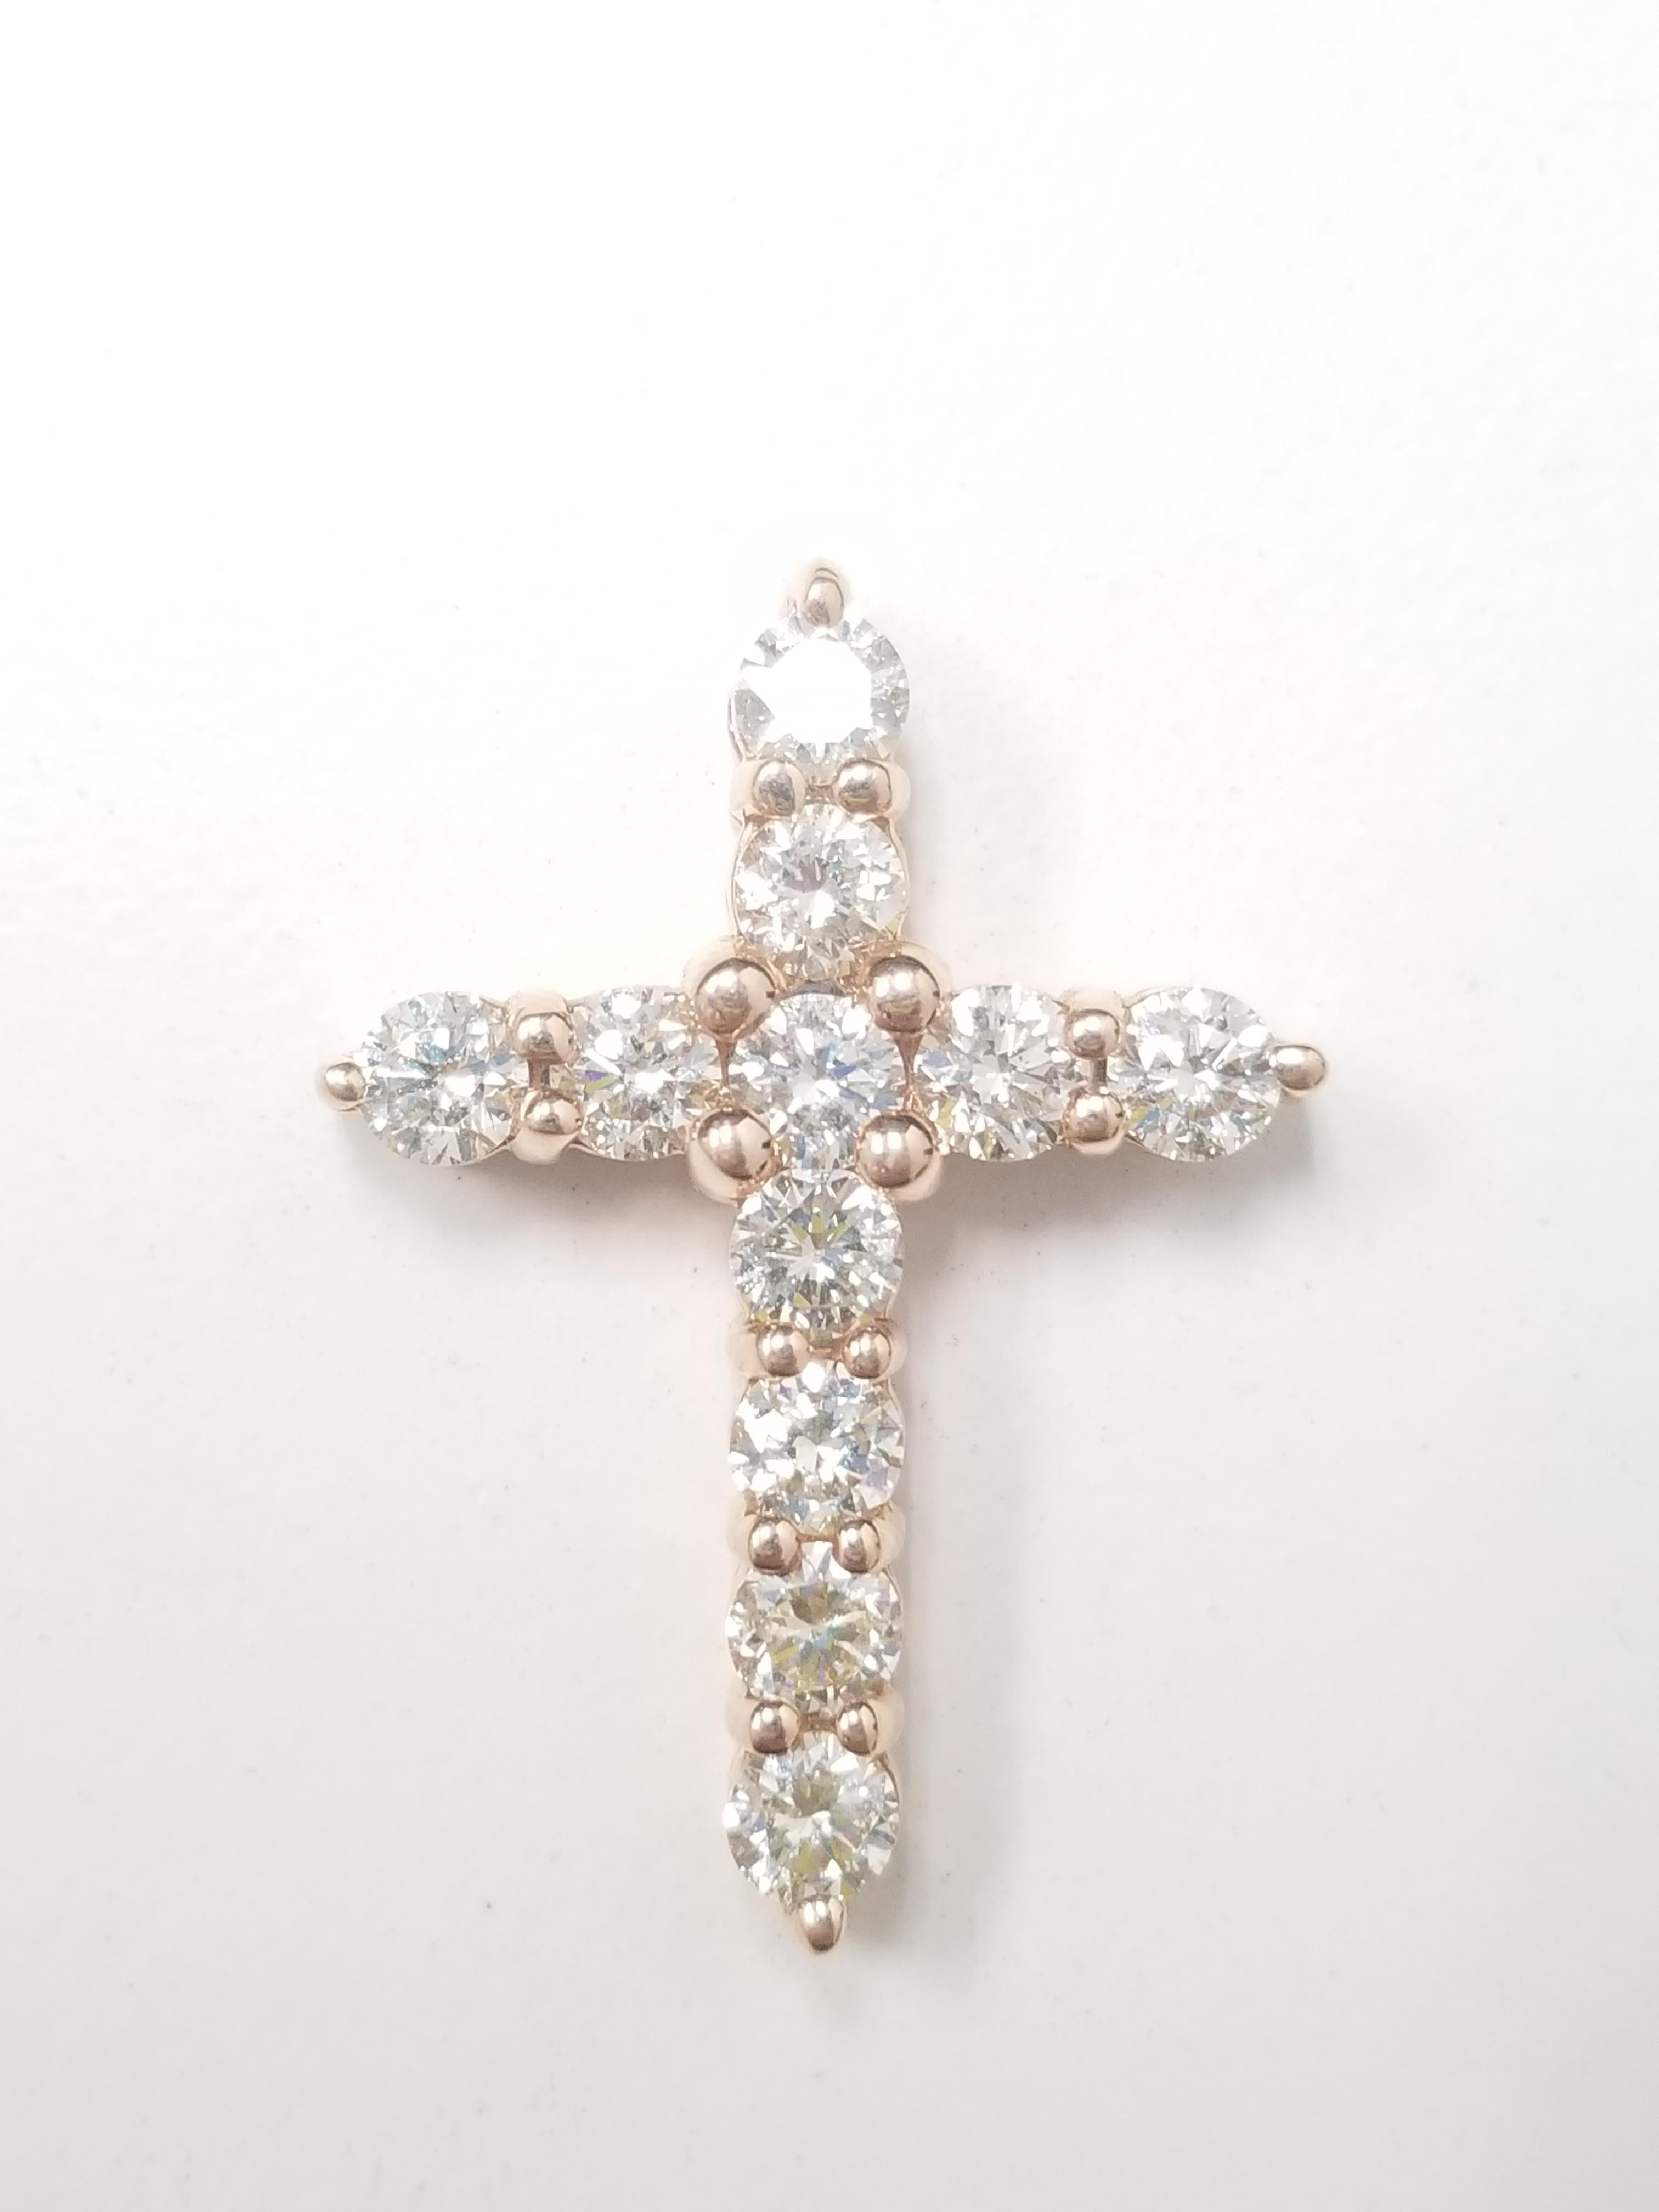 Beautiful 14K Rose gold and diamond cross pendant. A total weight of 2.15 Carat round cut diamonds very sparkly and shiny look. 

(Pendant Only)